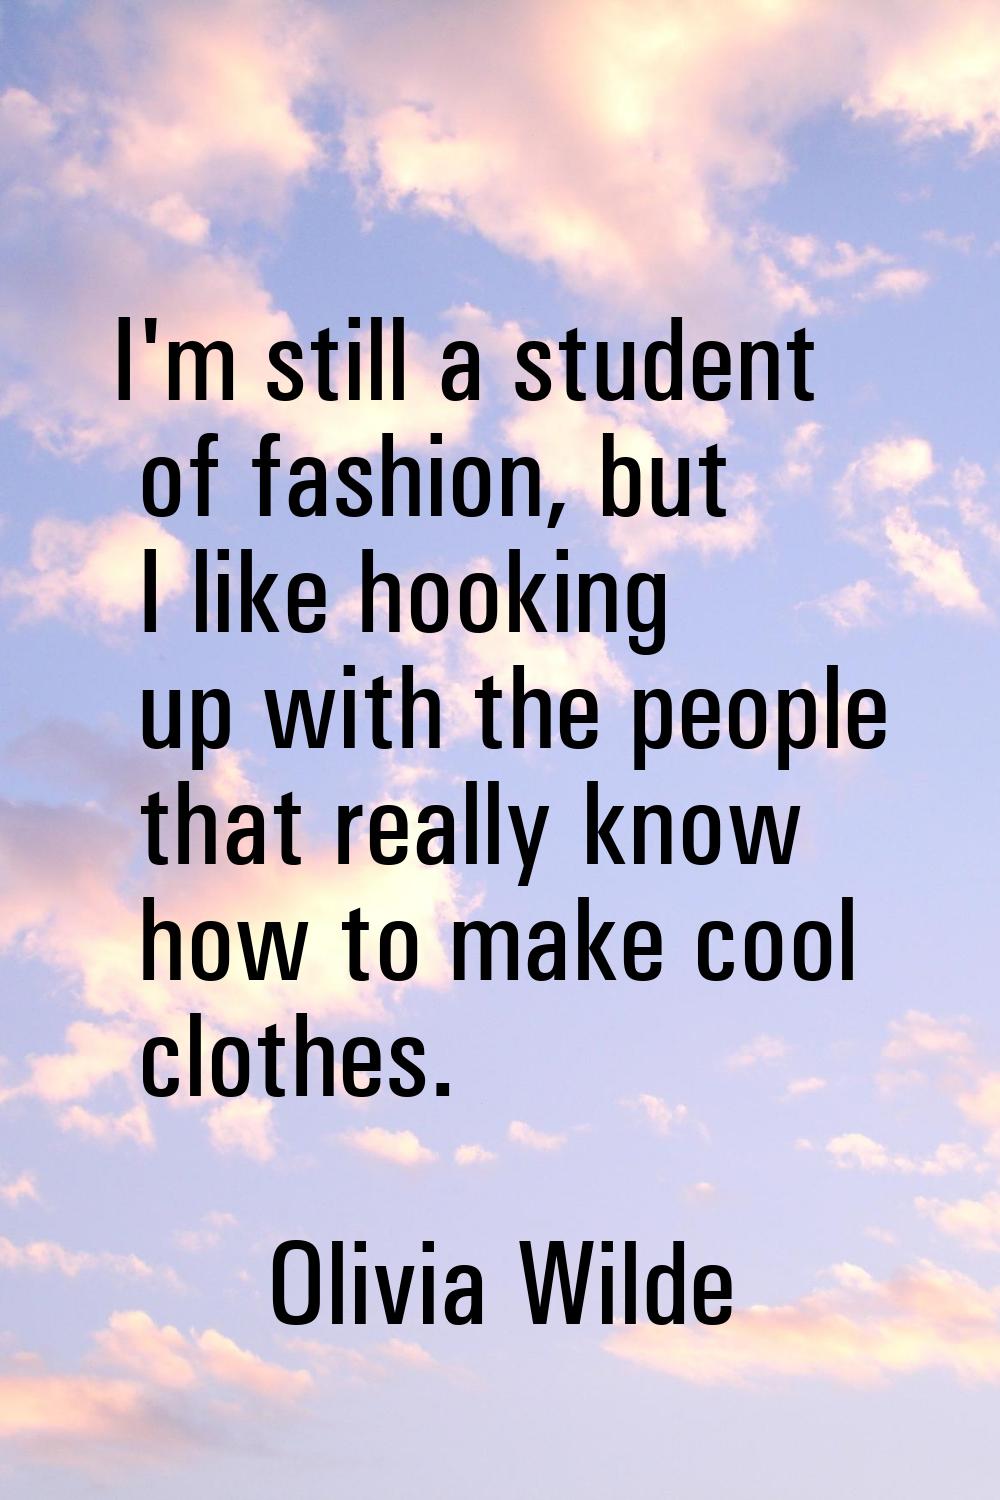 I'm still a student of fashion, but I like hooking up with the people that really know how to make 